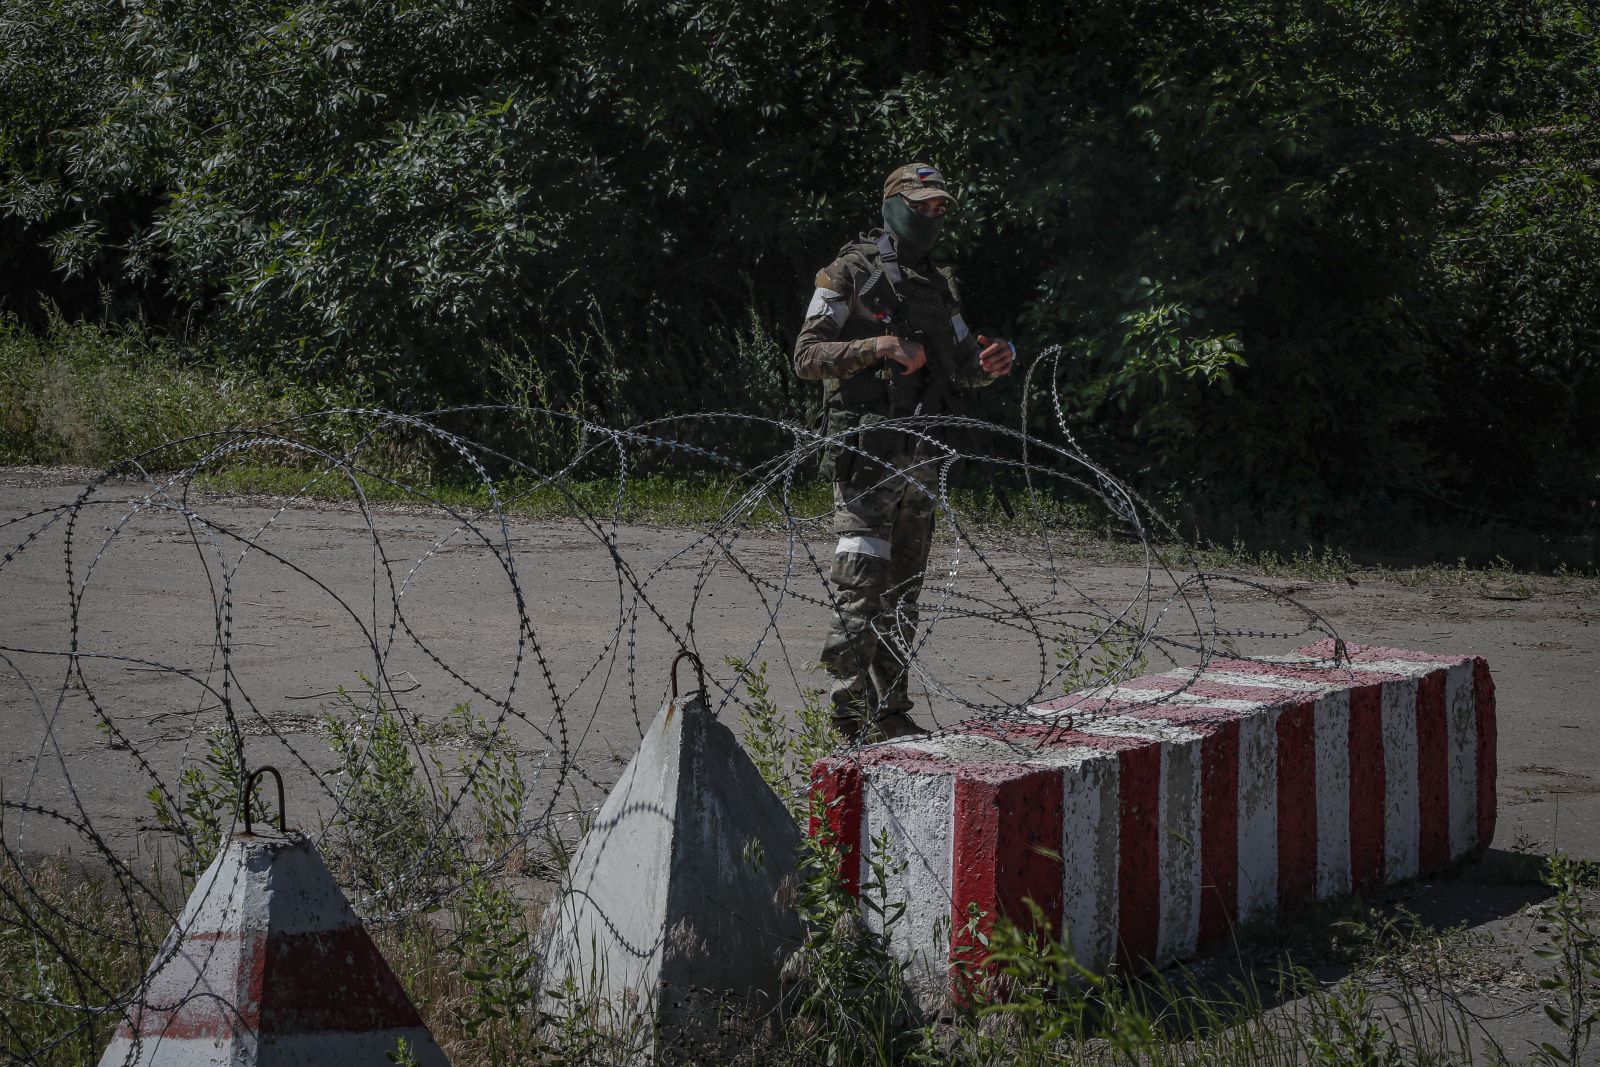 epa10008633 A picture taken during a visit to Luhansk organized by the Russian military shows a Russian serviceman guards on the road near fortified positions of the Ukrainian army captured in the battles in Schastia, Luhansk, region, Ukraine, 11 June 2022. On 24 February, Russian troops invaded Ukrainian territory starting a conflict that has provoked destruction and a humanitarian crisis. According to the UNHCR, more than six million refugees have fled Ukraine, and a further 7.7 million people have been displaced internally within Ukraine since.  EPA/SERGEI ILNITSKY